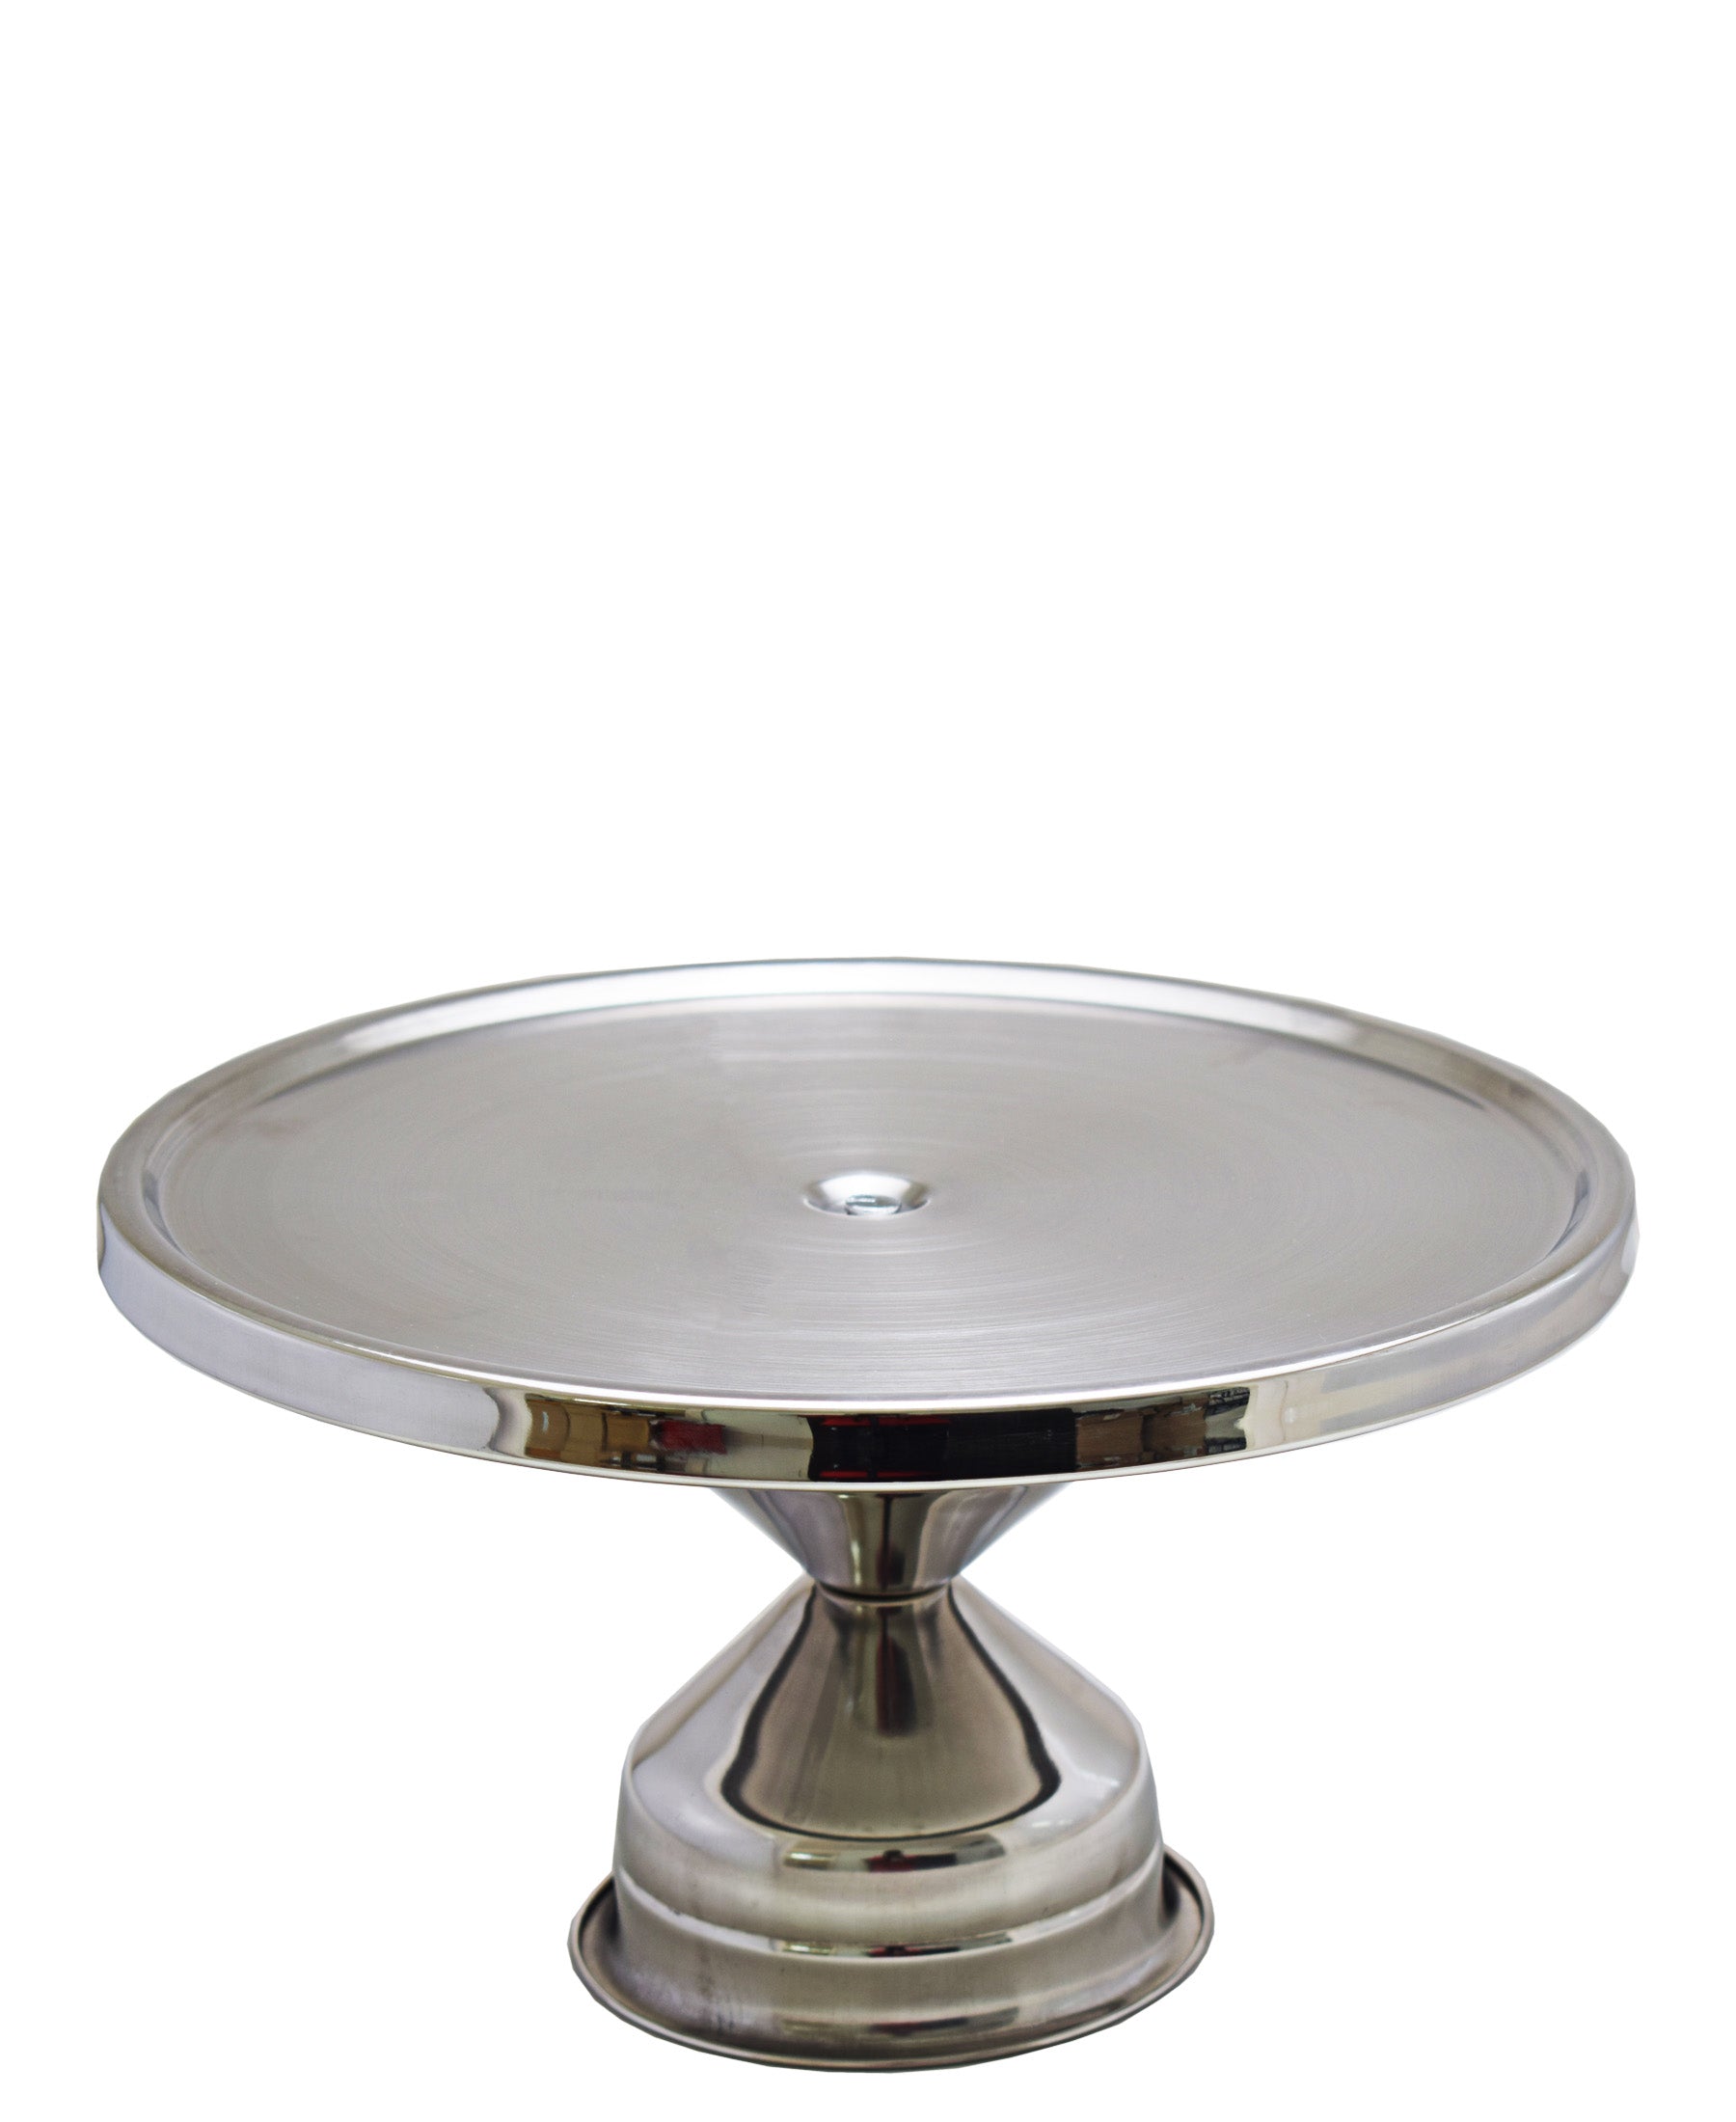 Kitchen Life Cake Stand - Silver